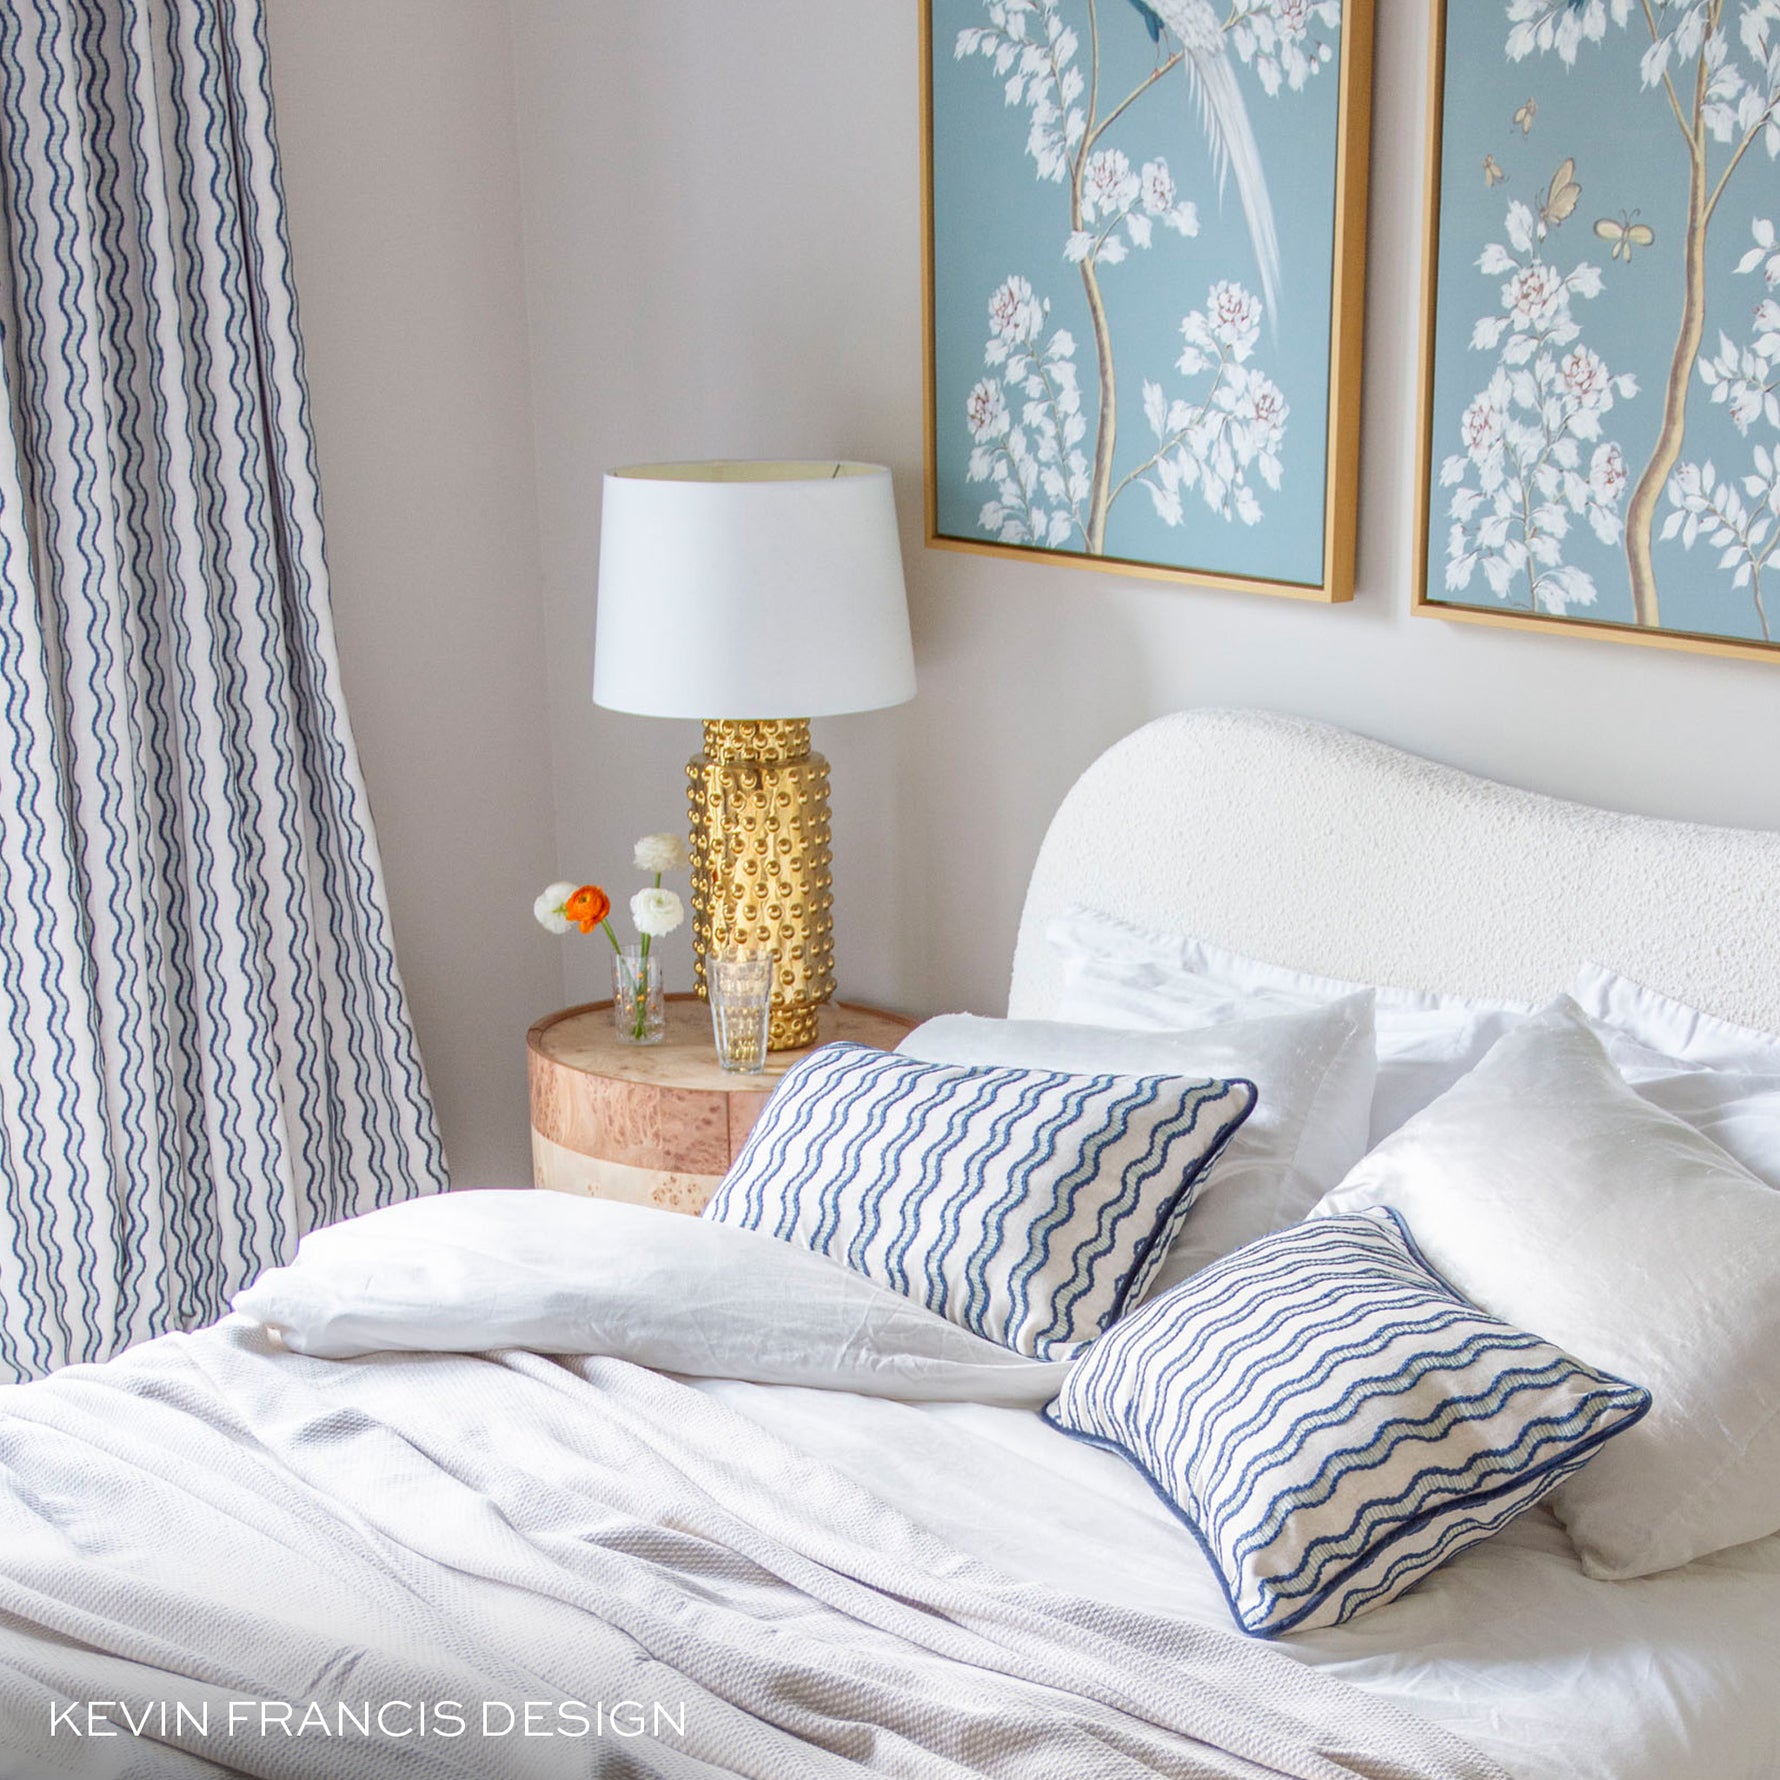 embroidered cream with navy wavy blue lines curtains and pillows in a bed room with blue and white floral artwork on the walls and white bedding